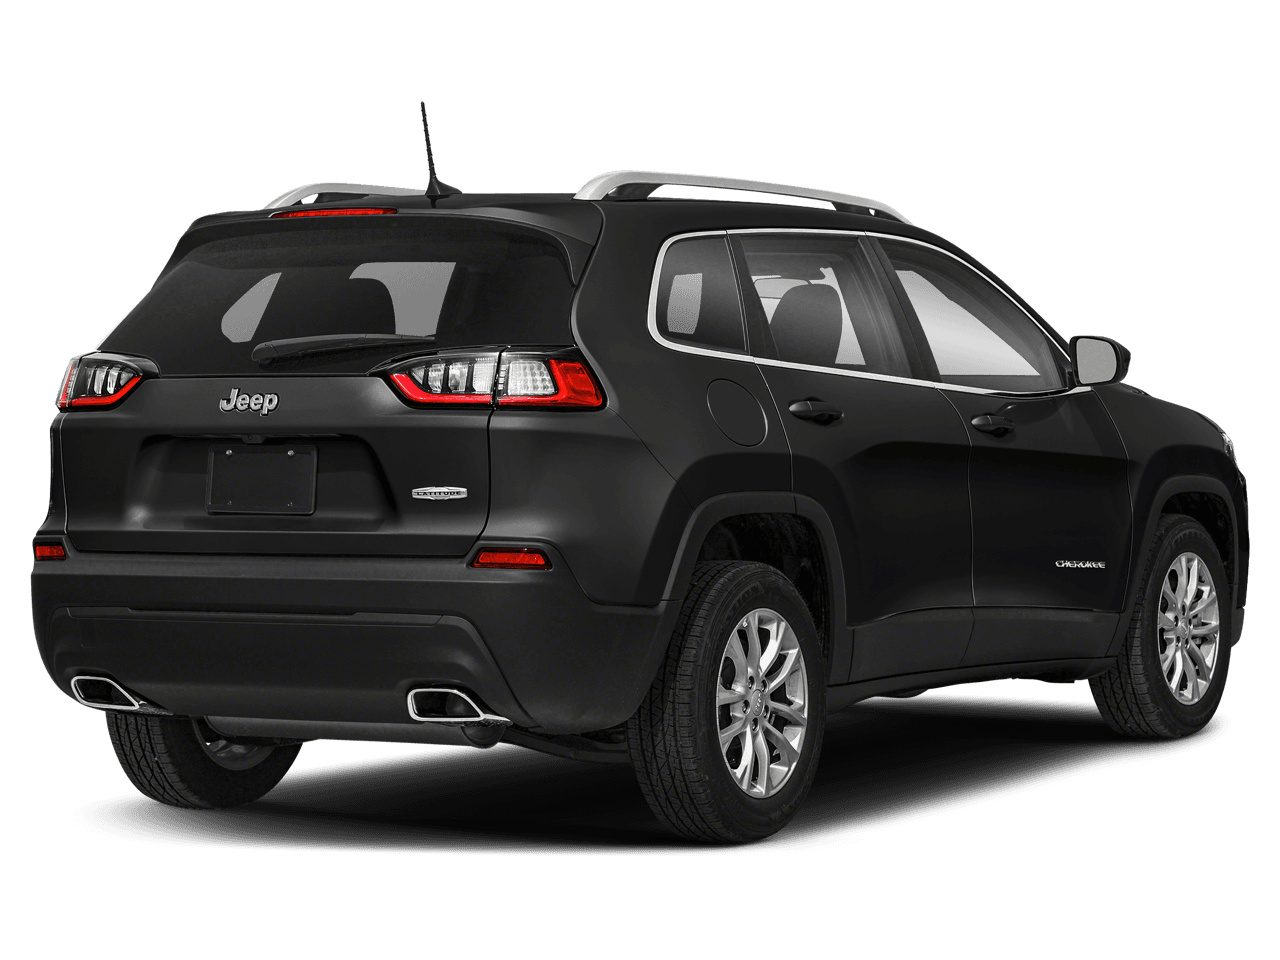 2020 Jeep Cherokee Photo in Wooster, OH 44691